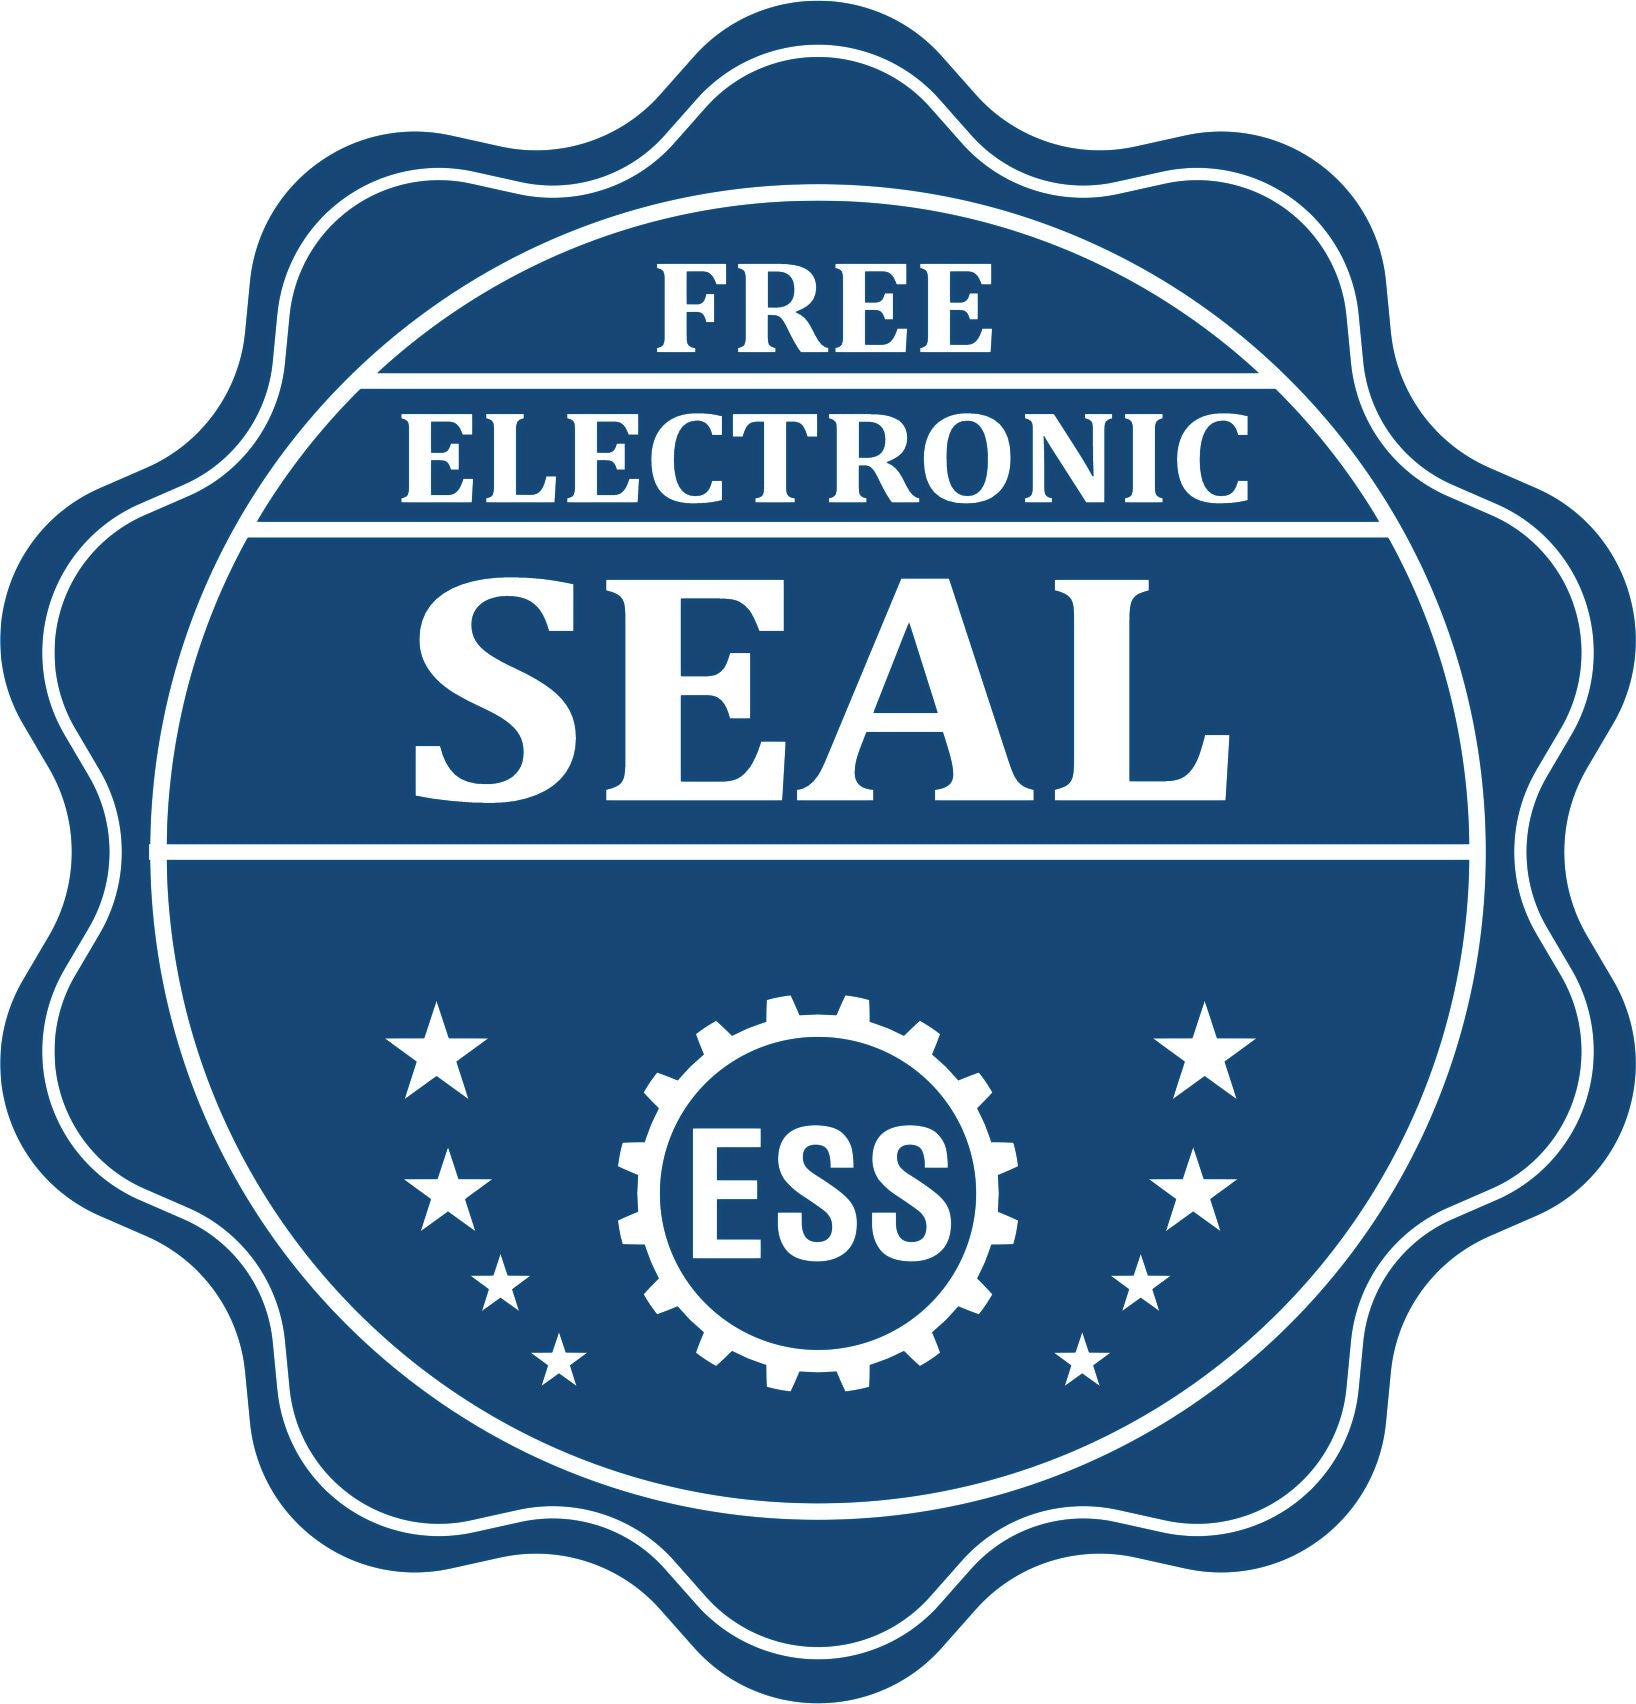 A badge showing a free electronic seal for the Soft Pocket Louisiana Landscape Architect Embosser with stars and the ESS gear on the emblem.